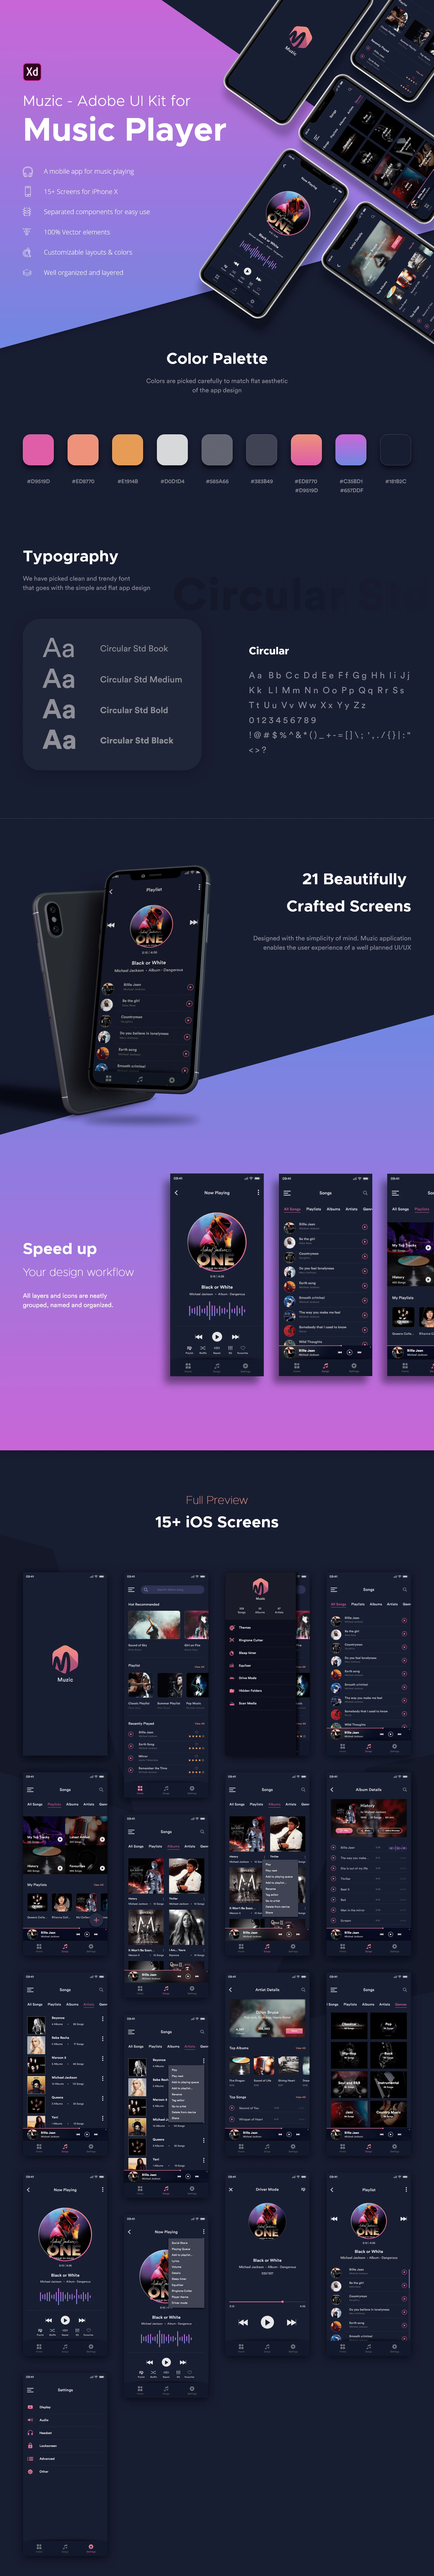 Muzic - Free Mobile UI Kit for Adobe XD - Minimal and clean music app design, 15+ screens for you to get started.